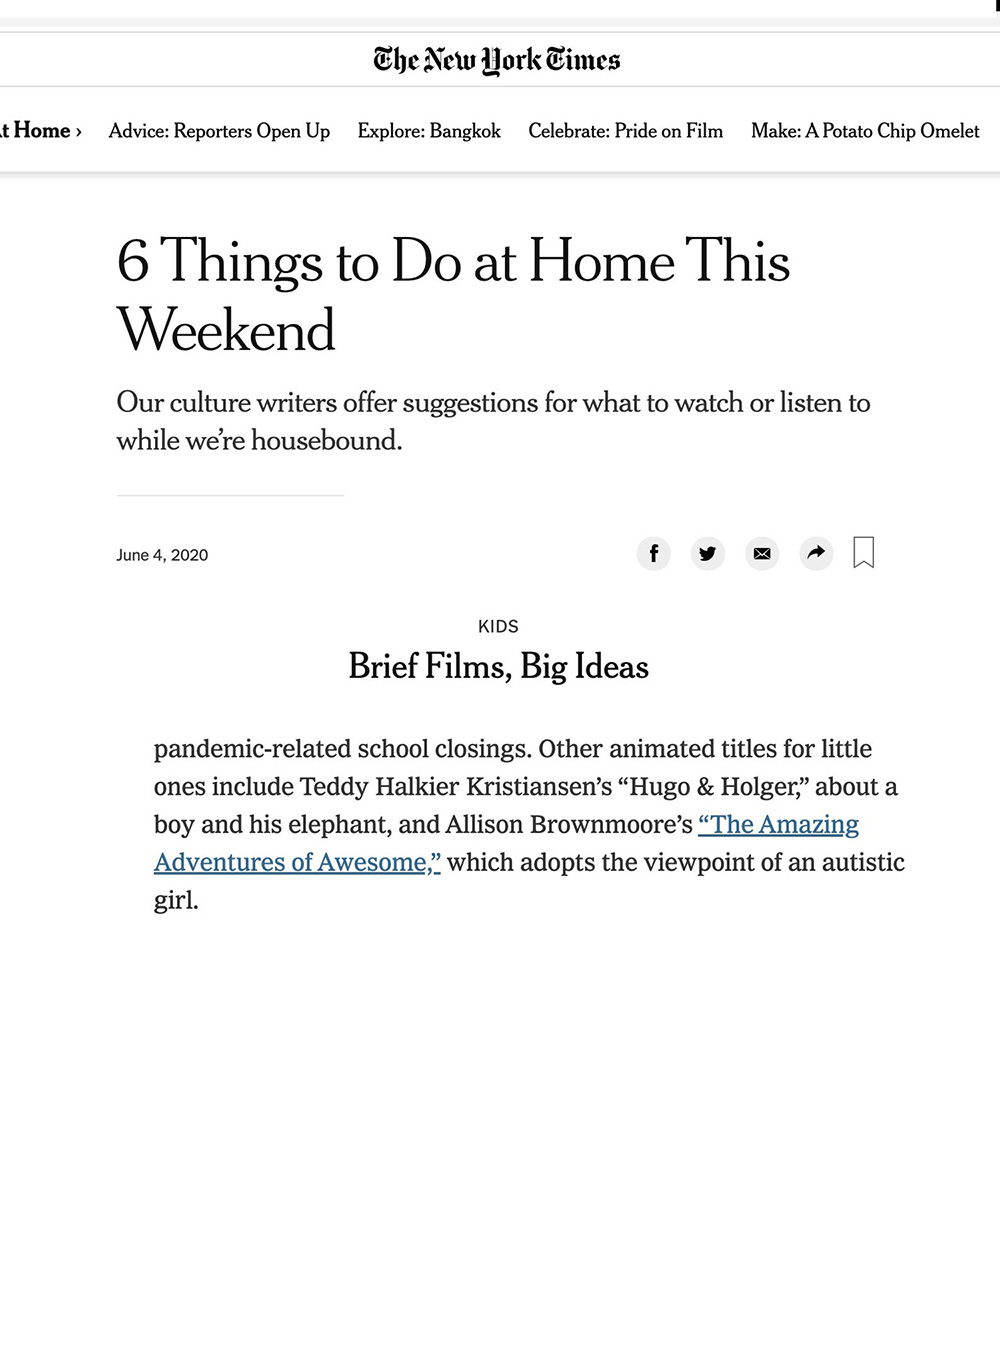 Allison Brownmoore NY Times article thumbnail